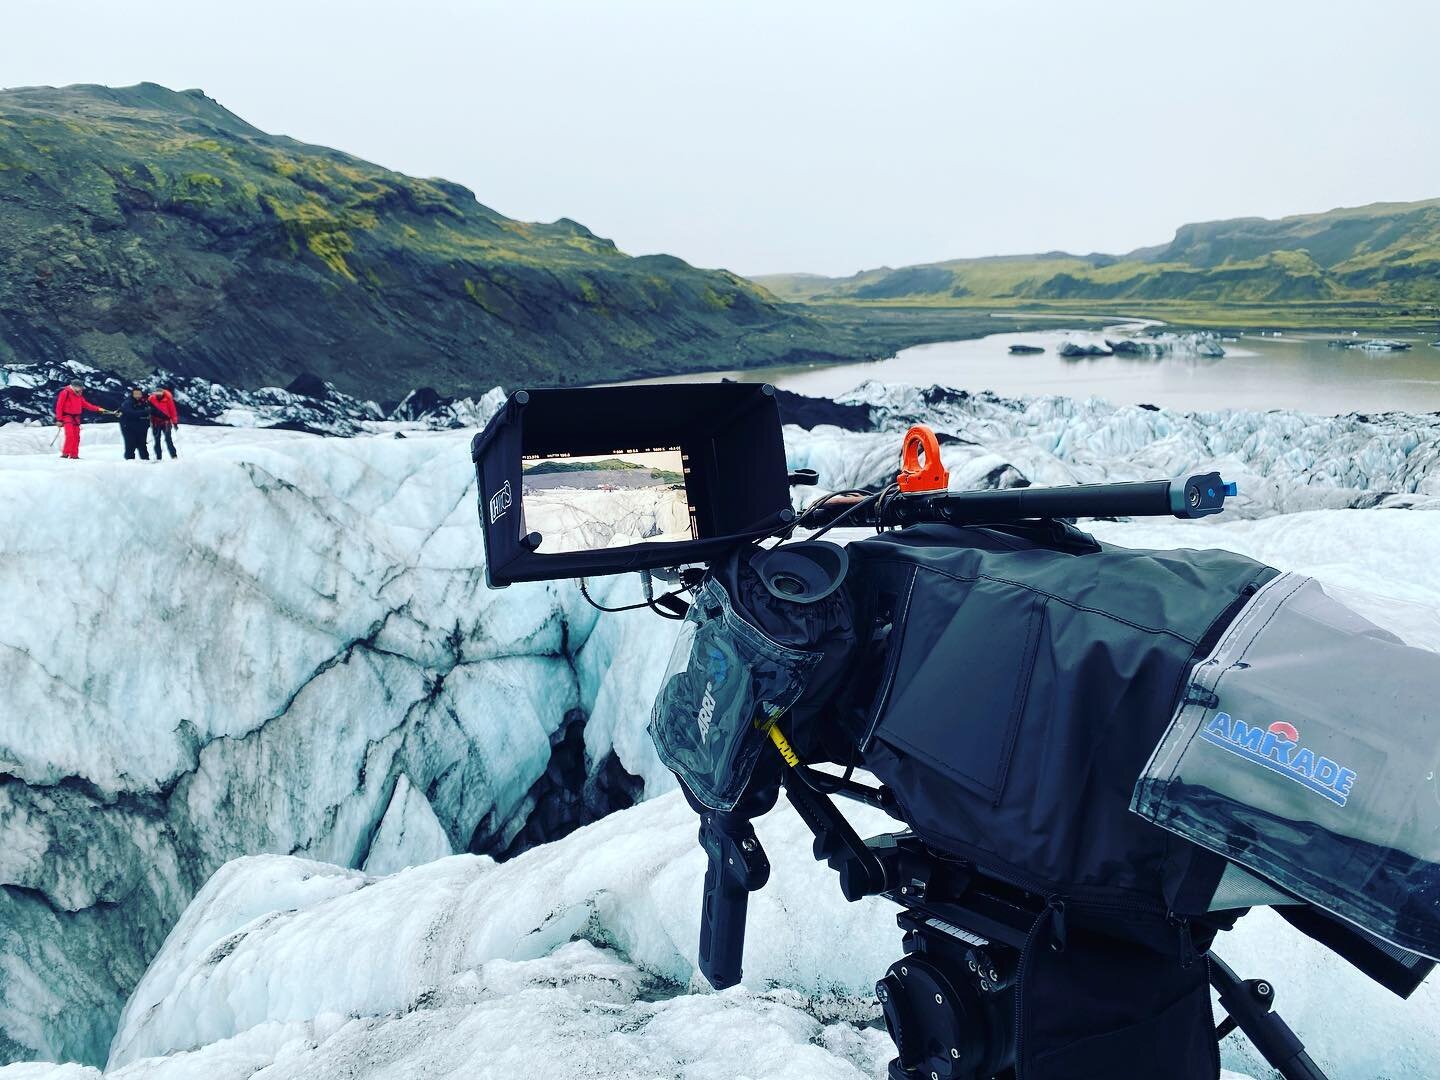 Well this was def a different type of shoot this camera experienced. #lupe_theLF
. 
.
.
.
#production #iceland #equipment #gear #cameragear #cameradept #setlife #travel #austin #natgeo #alexaminilf #alexa #film #filmlife